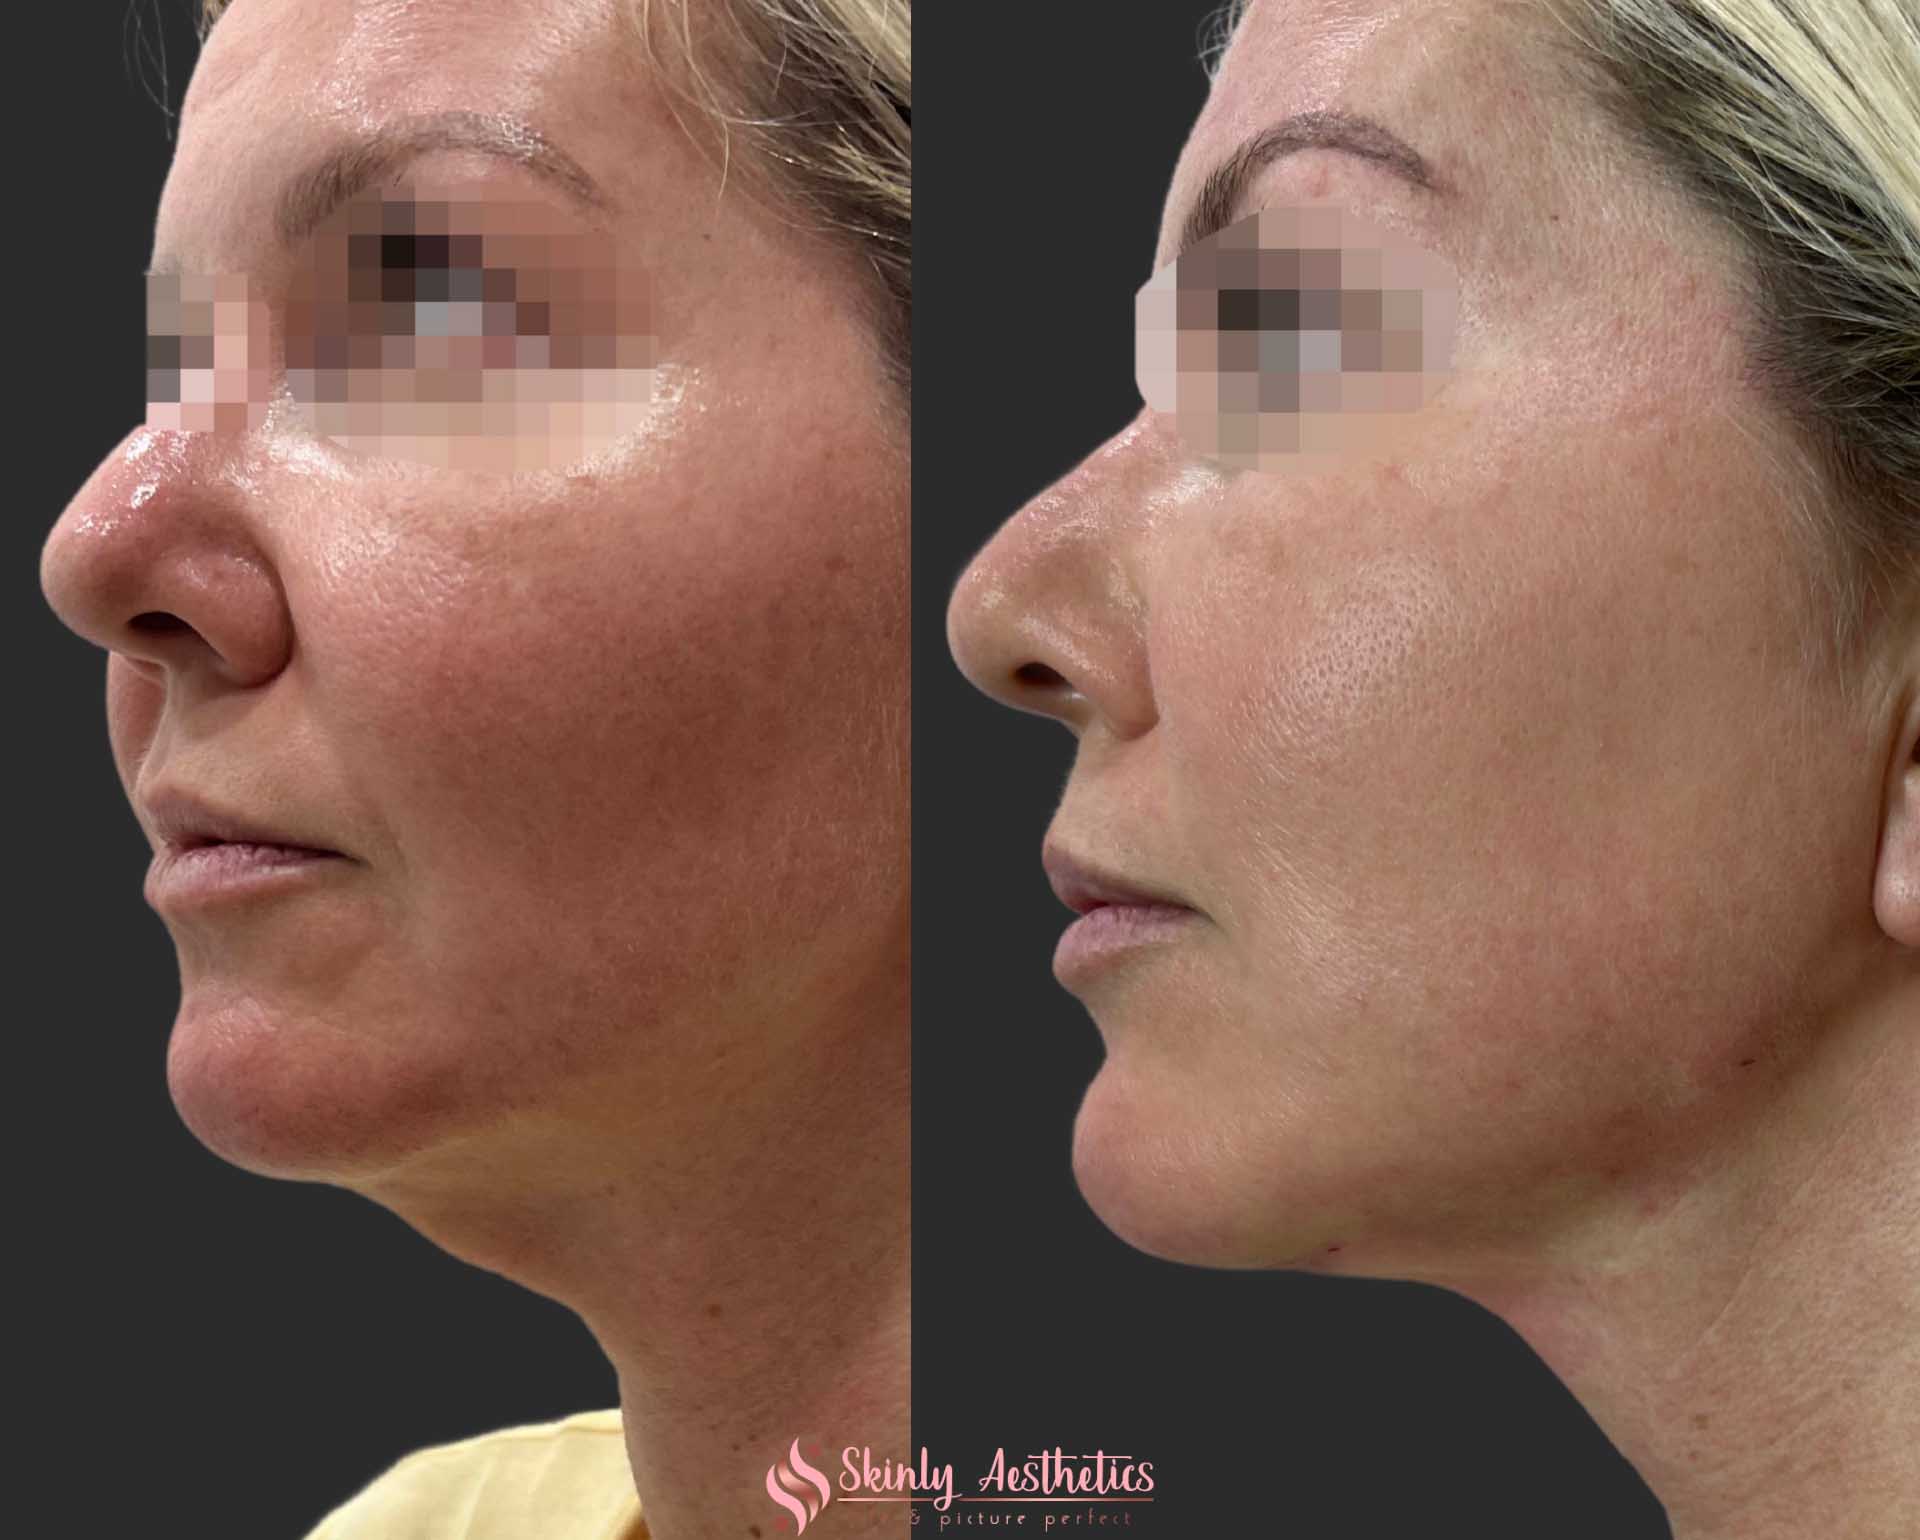 results after getting PDO thread neck lift to tighten turkey neck